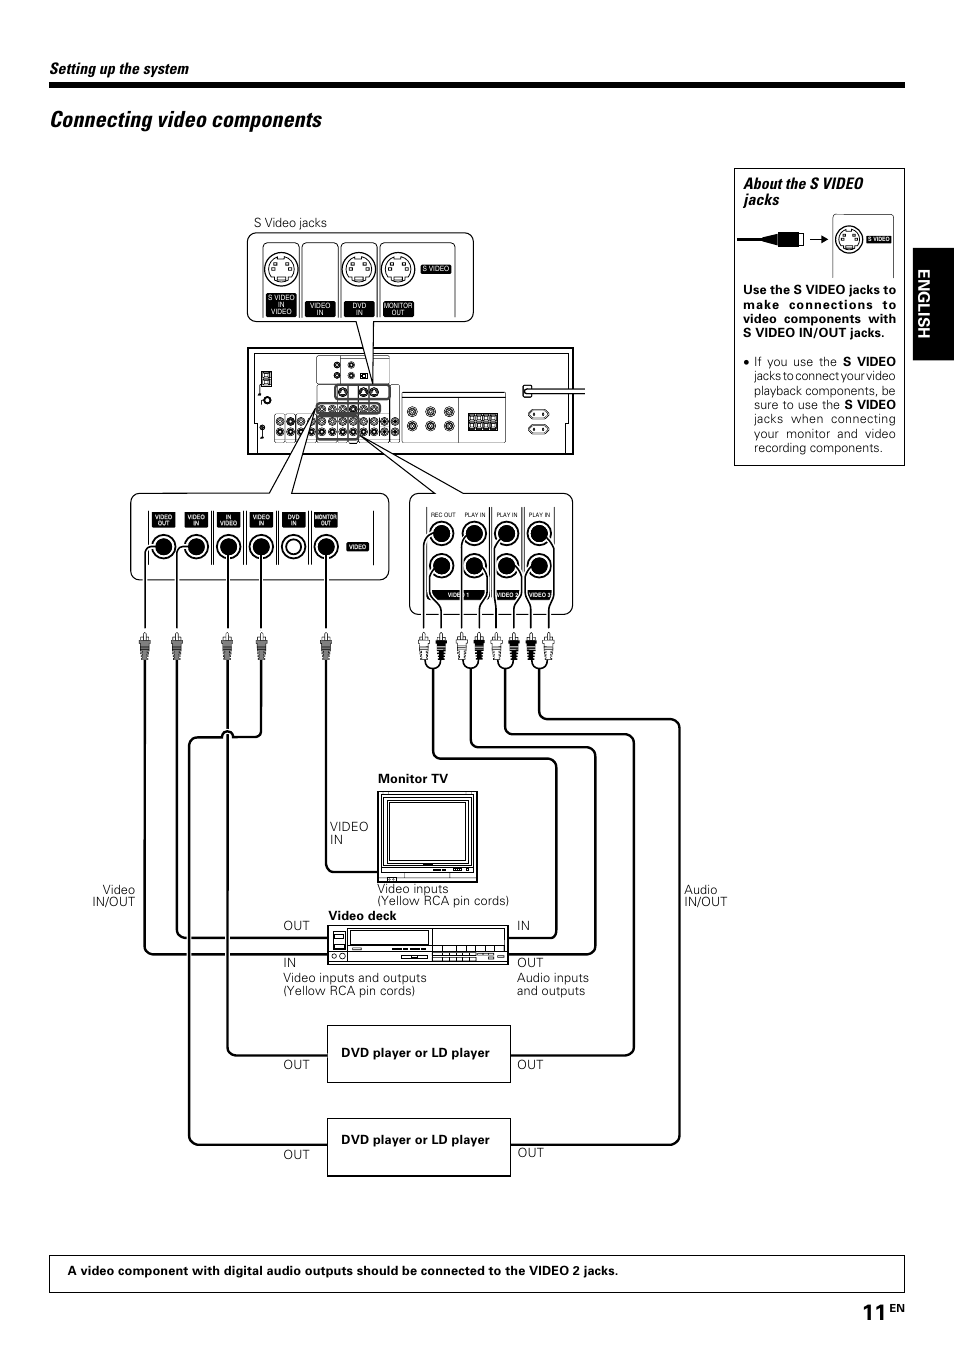 Connecting video components, About the s video jacks, Setting up the system | English | Kenwood KRF-V7070D User Manual | Page 11 / 48